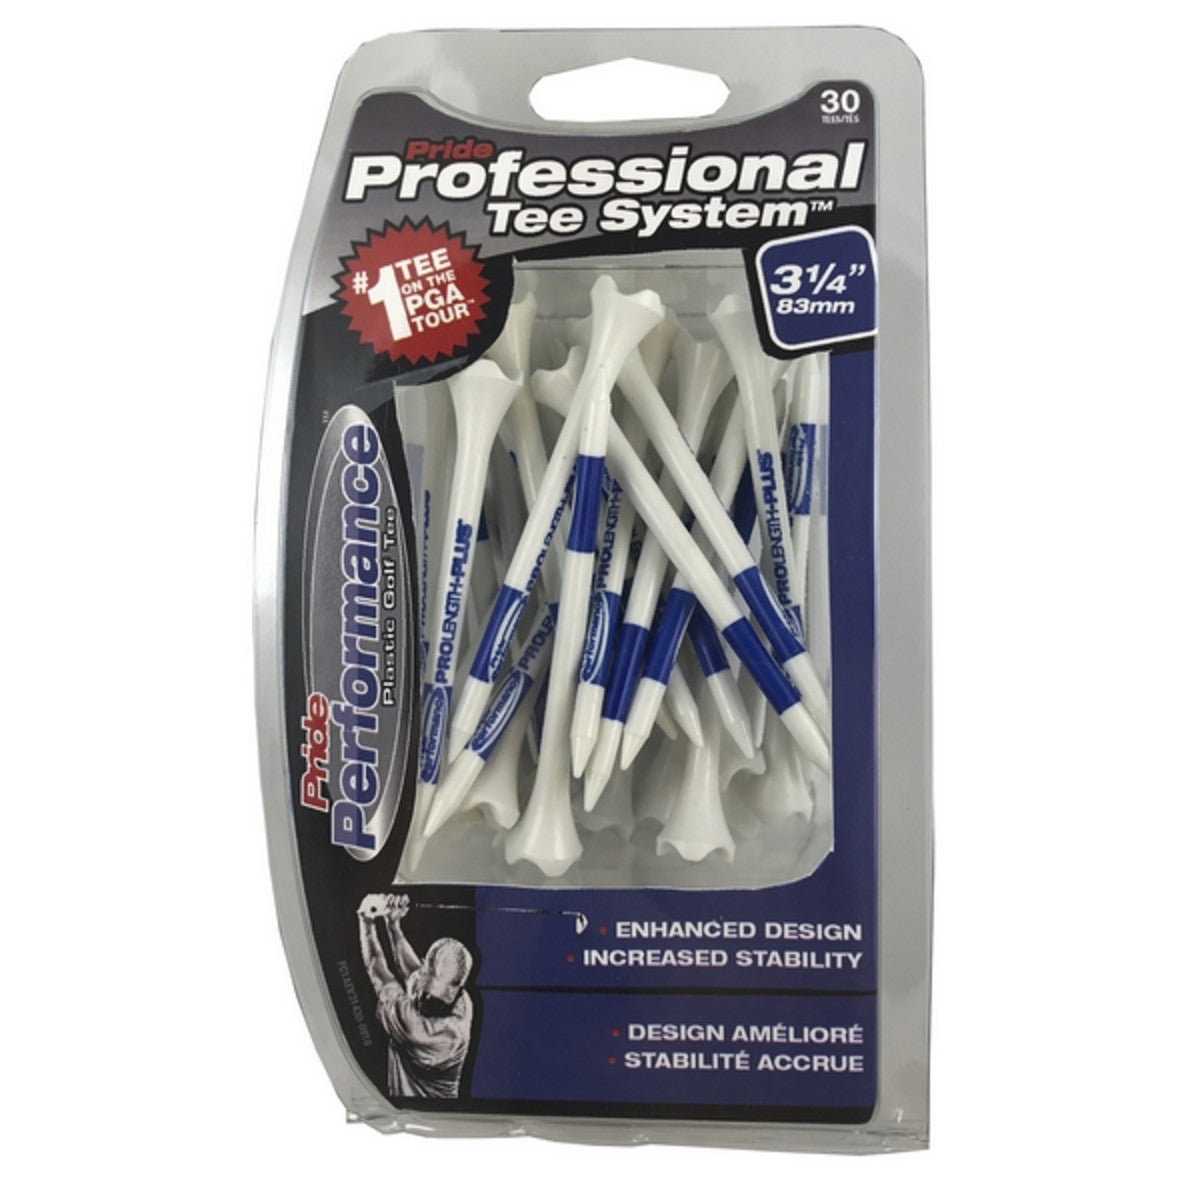 PRIDESPORTS PROFESSIONAL TEE SYSTEM PLASTIC TEES 3 1/4" BLISTER PACK